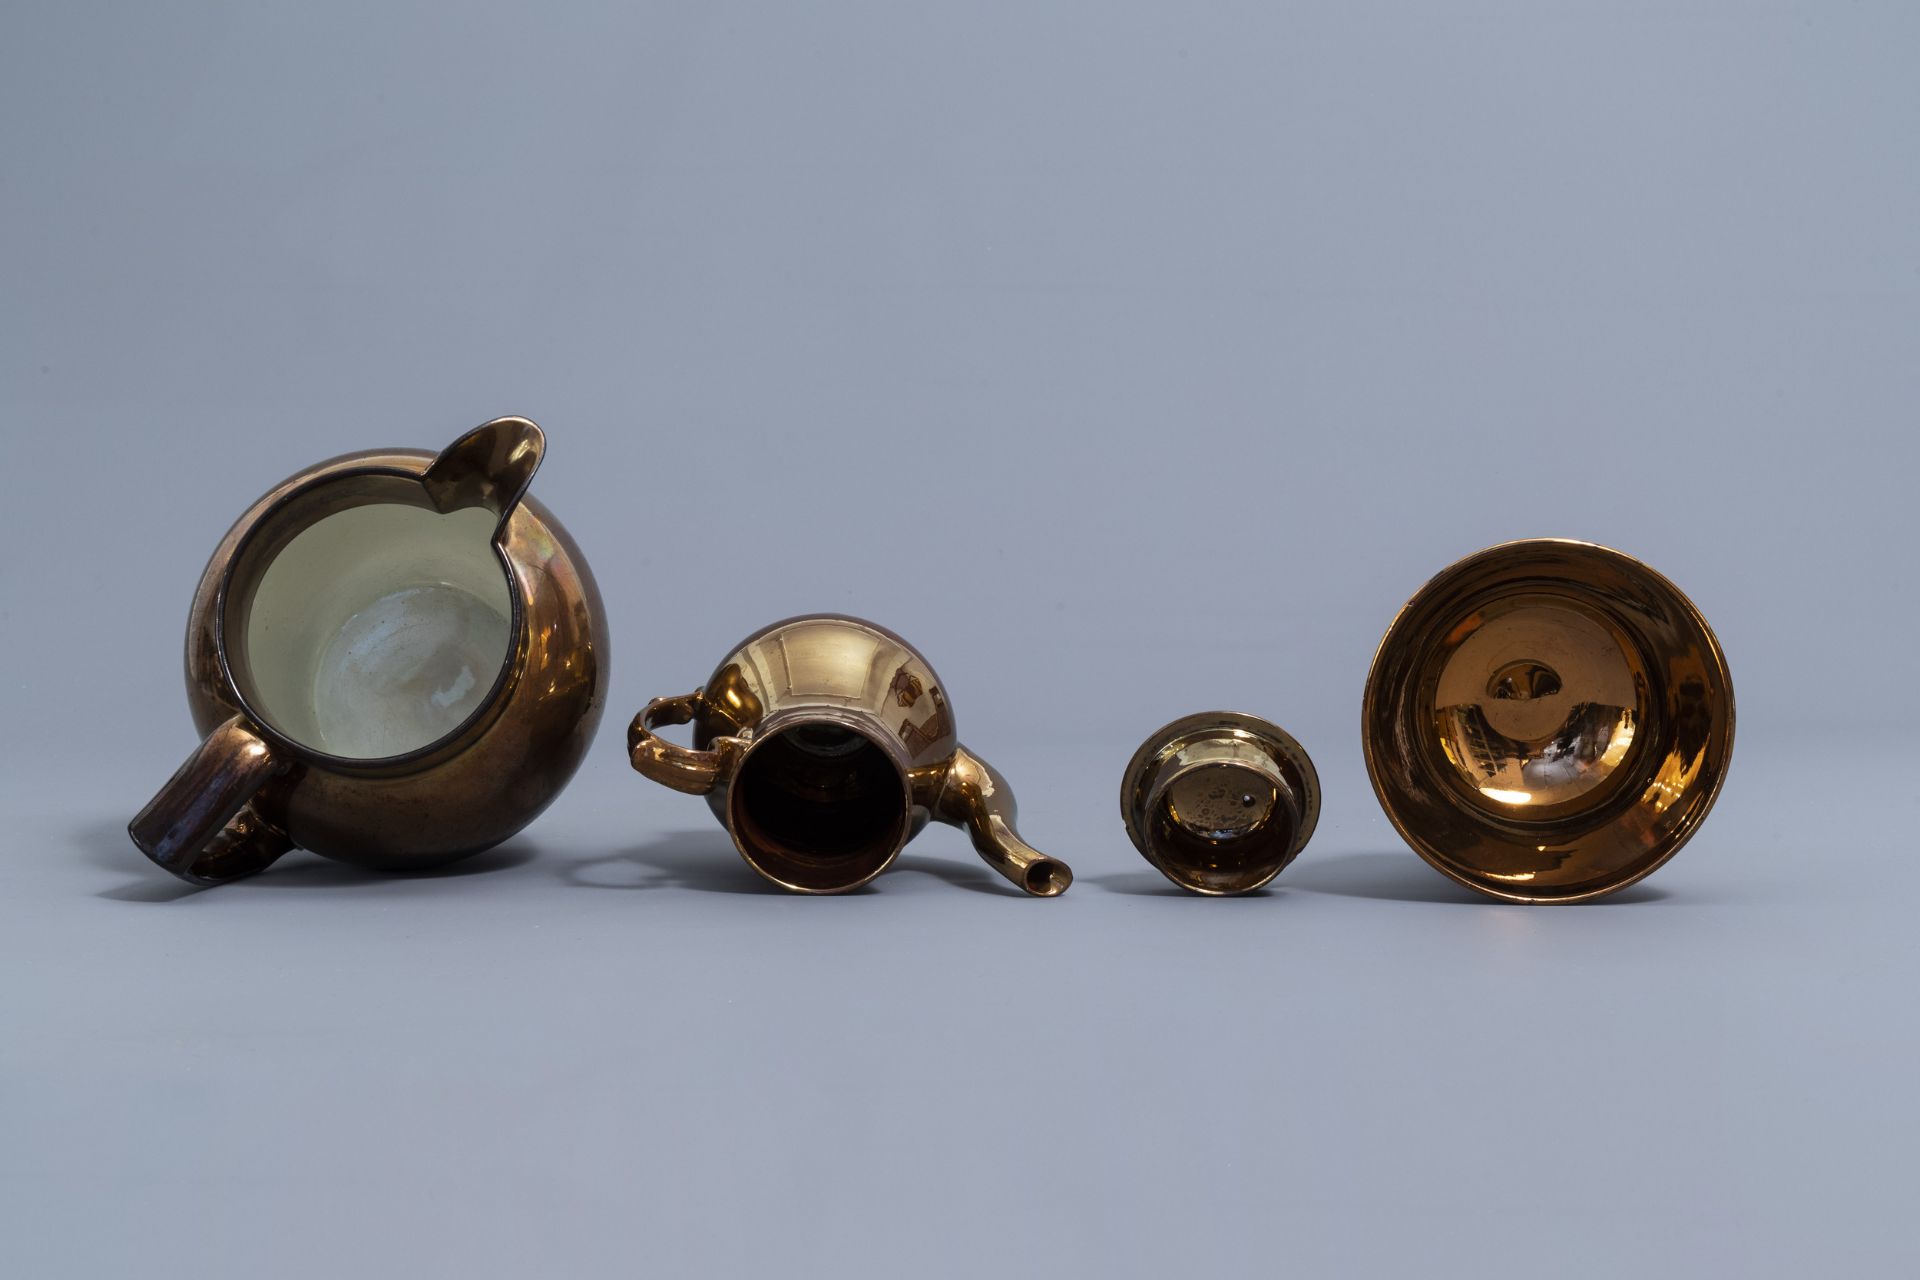 A varied collection of English monochrome copper lustreware items, 19th C. - Image 47 of 50